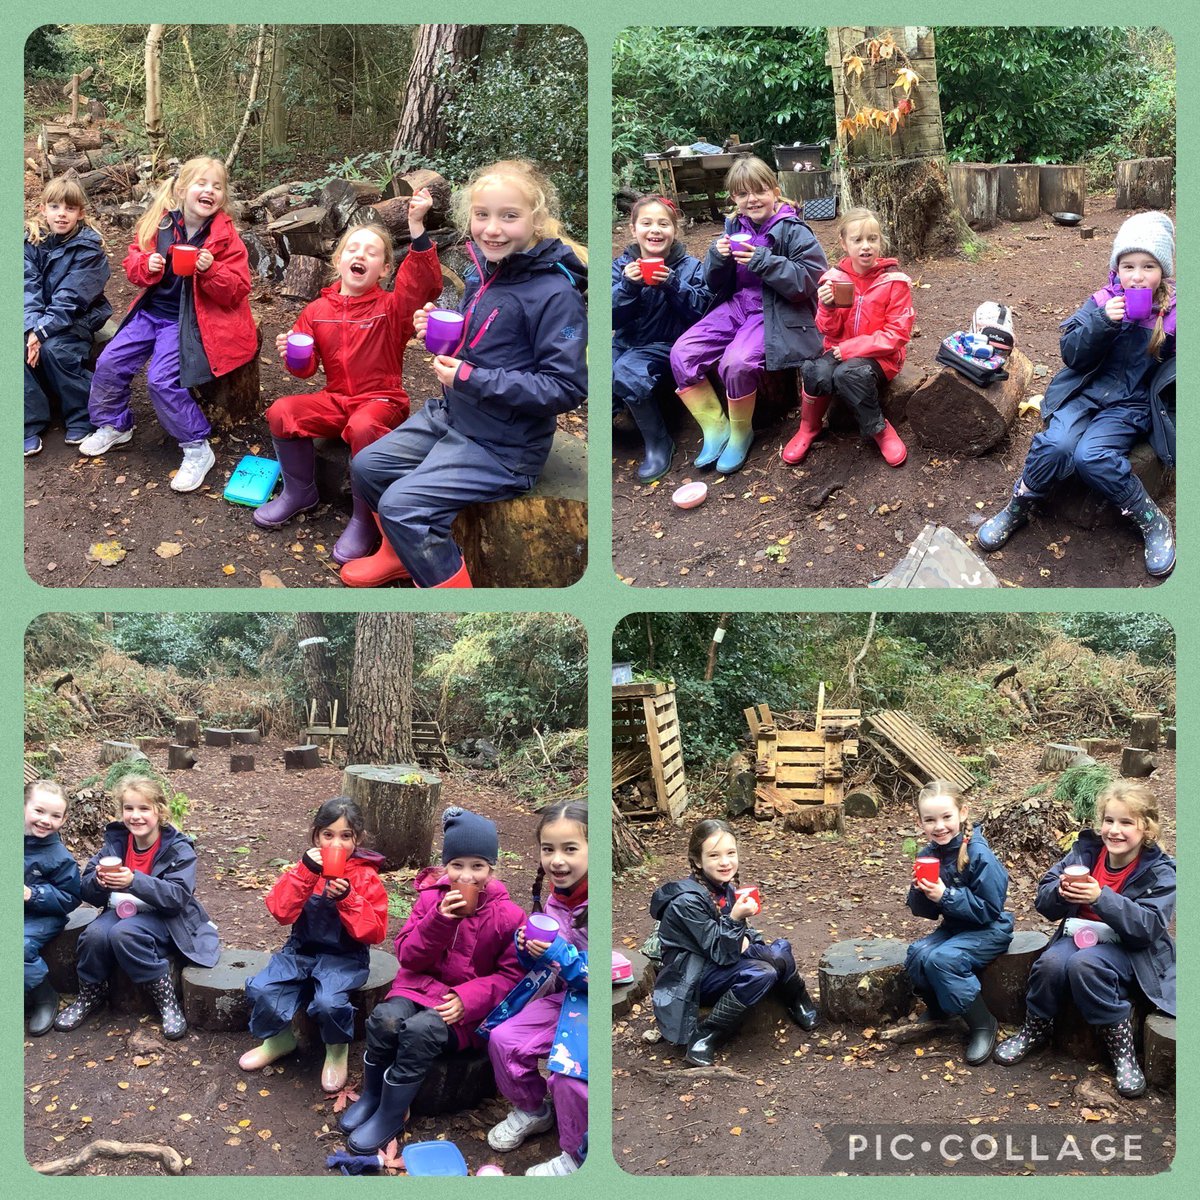 3F proved that you can have loads of fun in the cold weather. They found ice sculptures in our water tray. They raked paths and built dens to keep warm. Of course, there was plenty of hot chocolate too! @THSch_Junior